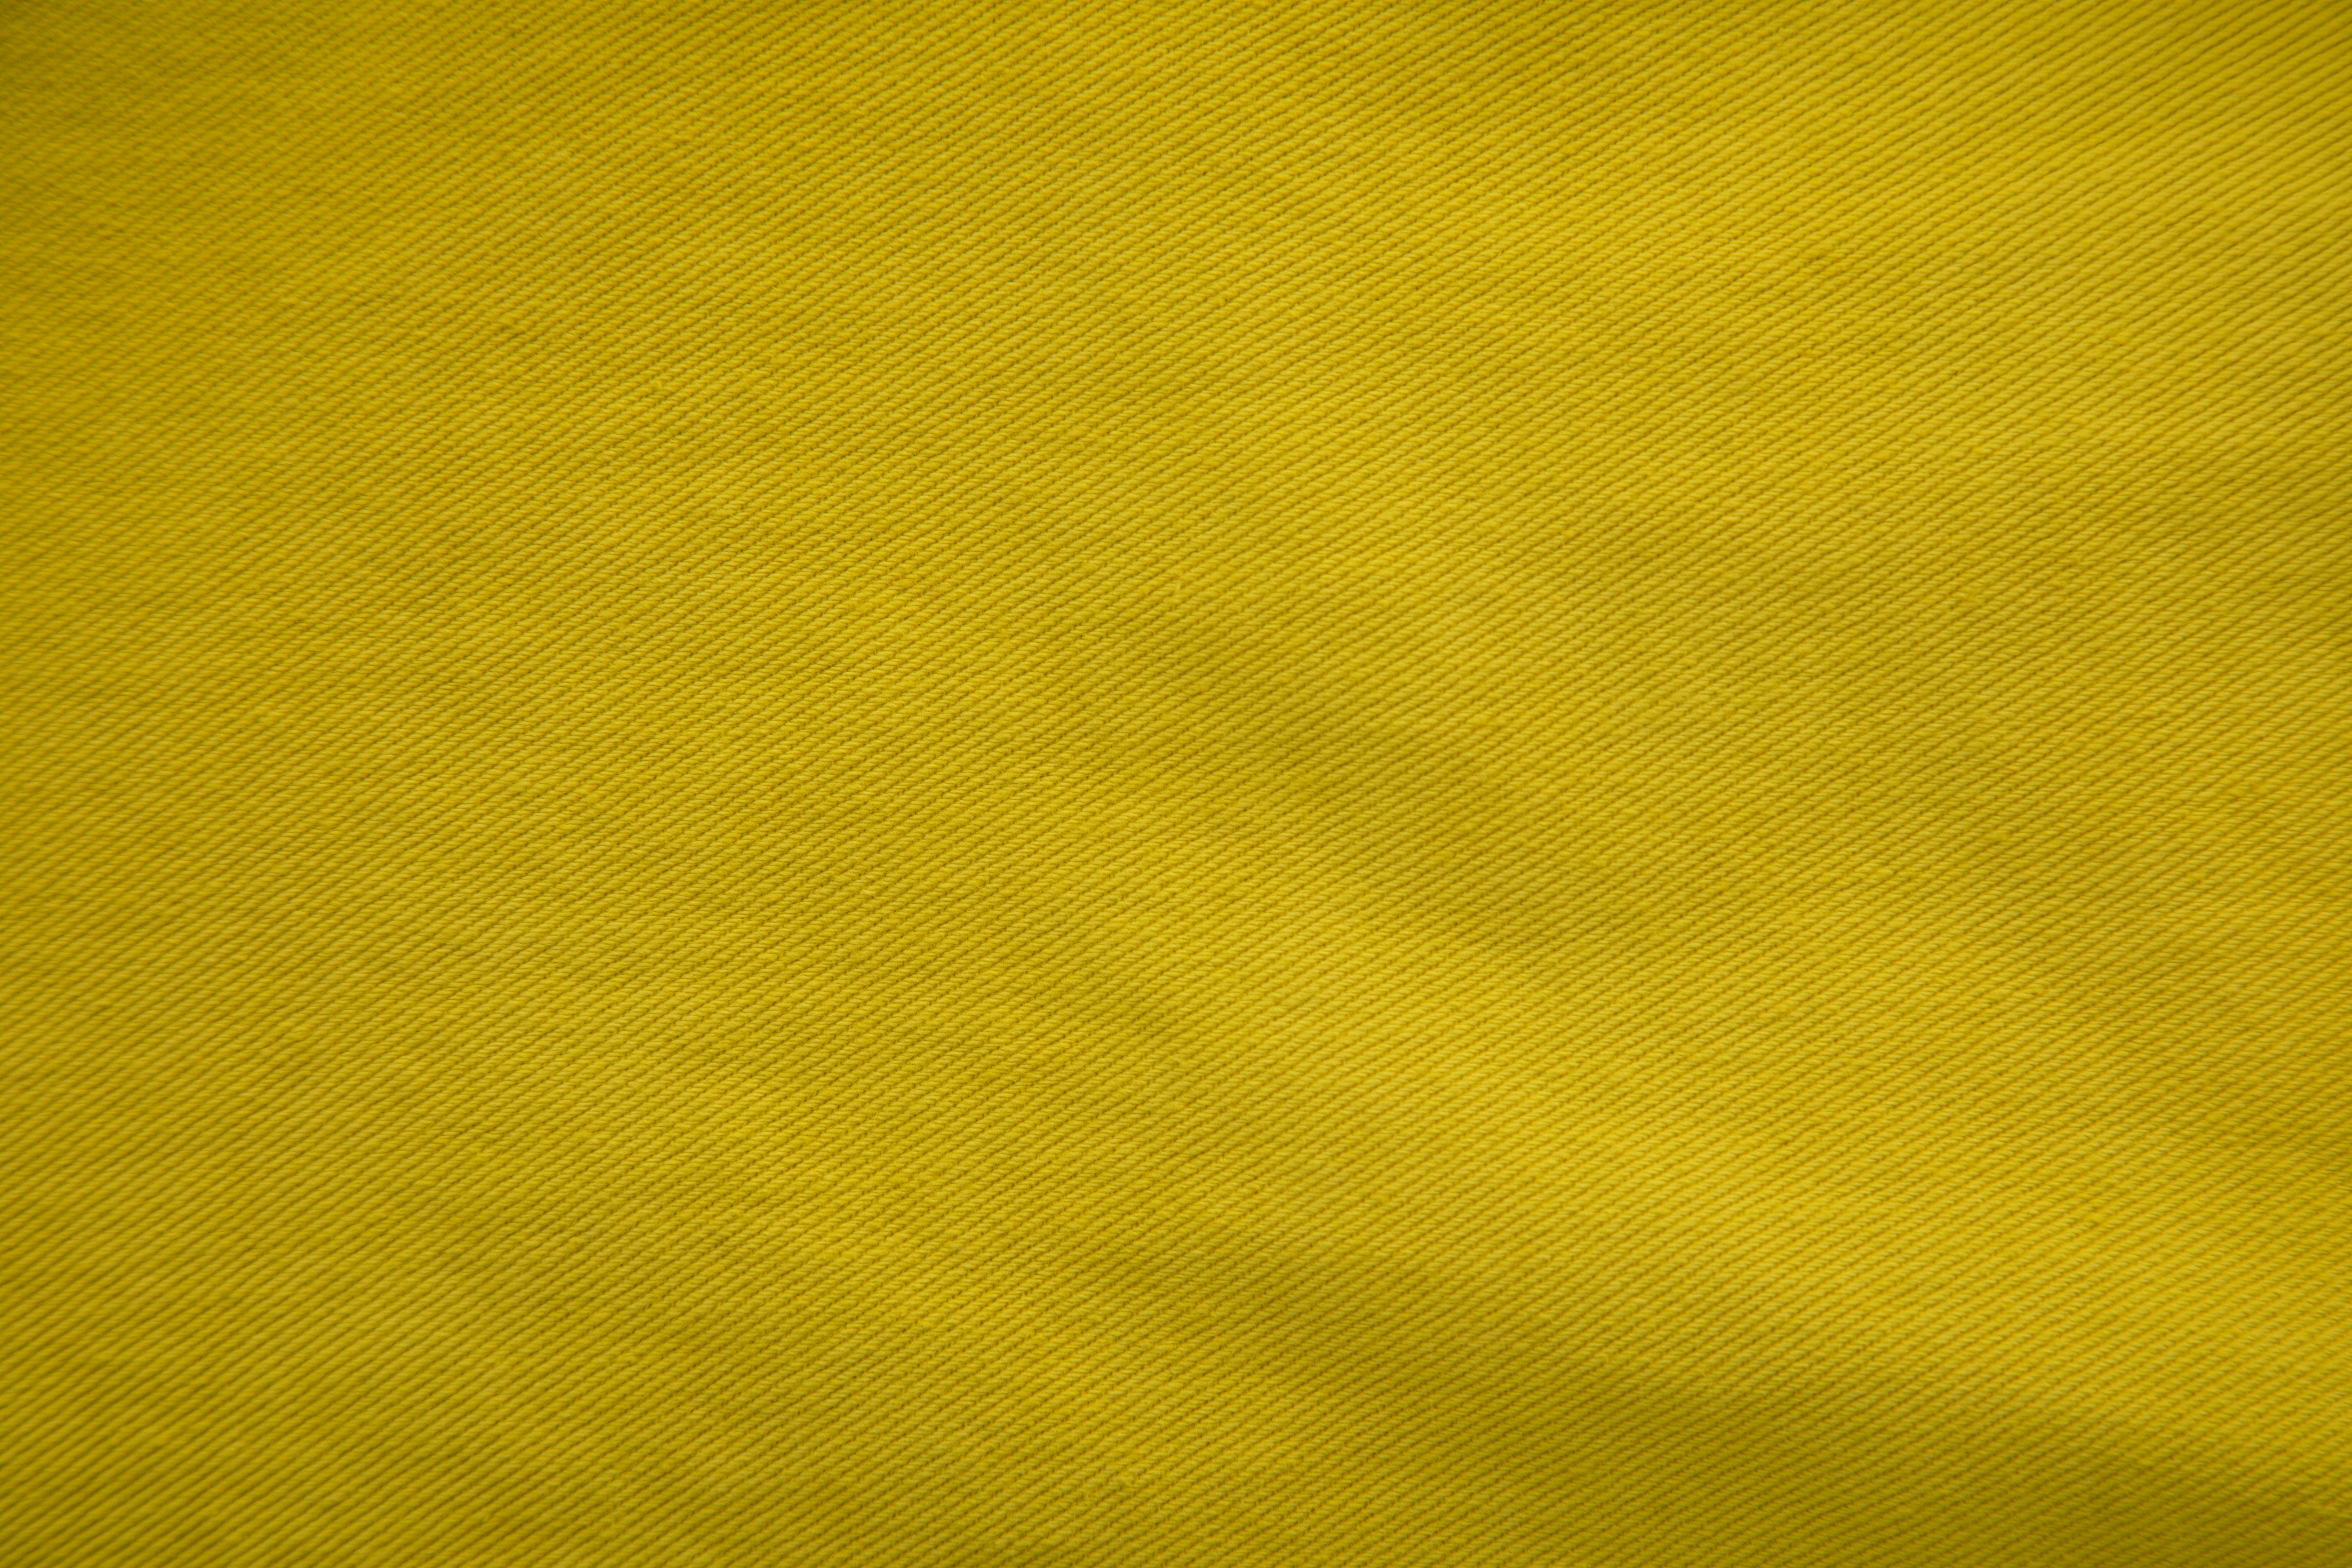 150419 download wallpaper textures, yellow, texture, cloth, color screensavers and pictures for free